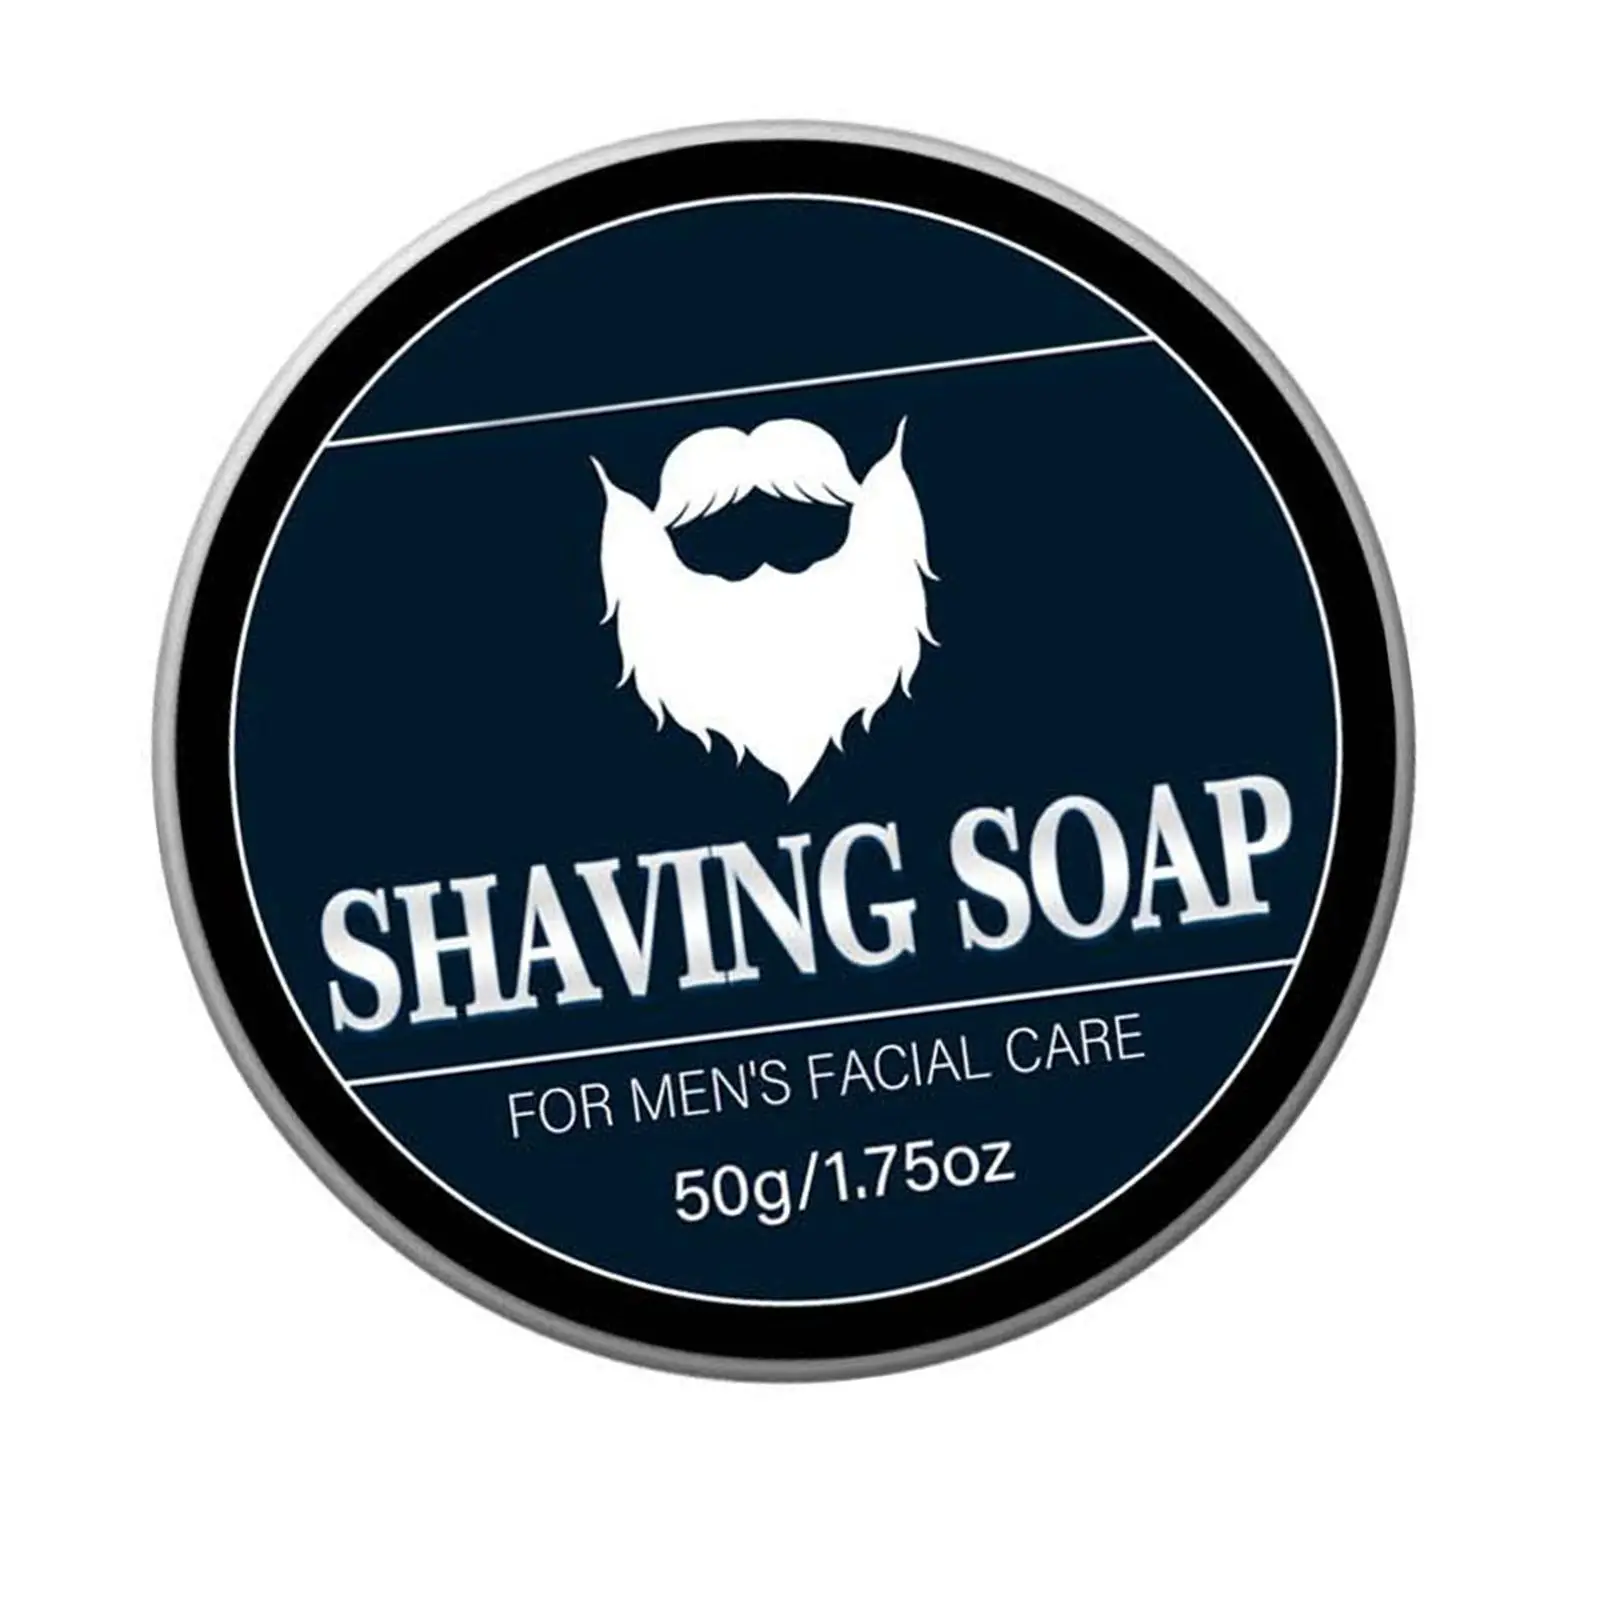 

Shave Soap, Rich Lather Comfortable Facial Care Moisturizing Scented Luxury 50G 1.75oz Shaving Cream, for Home Salon Barber.